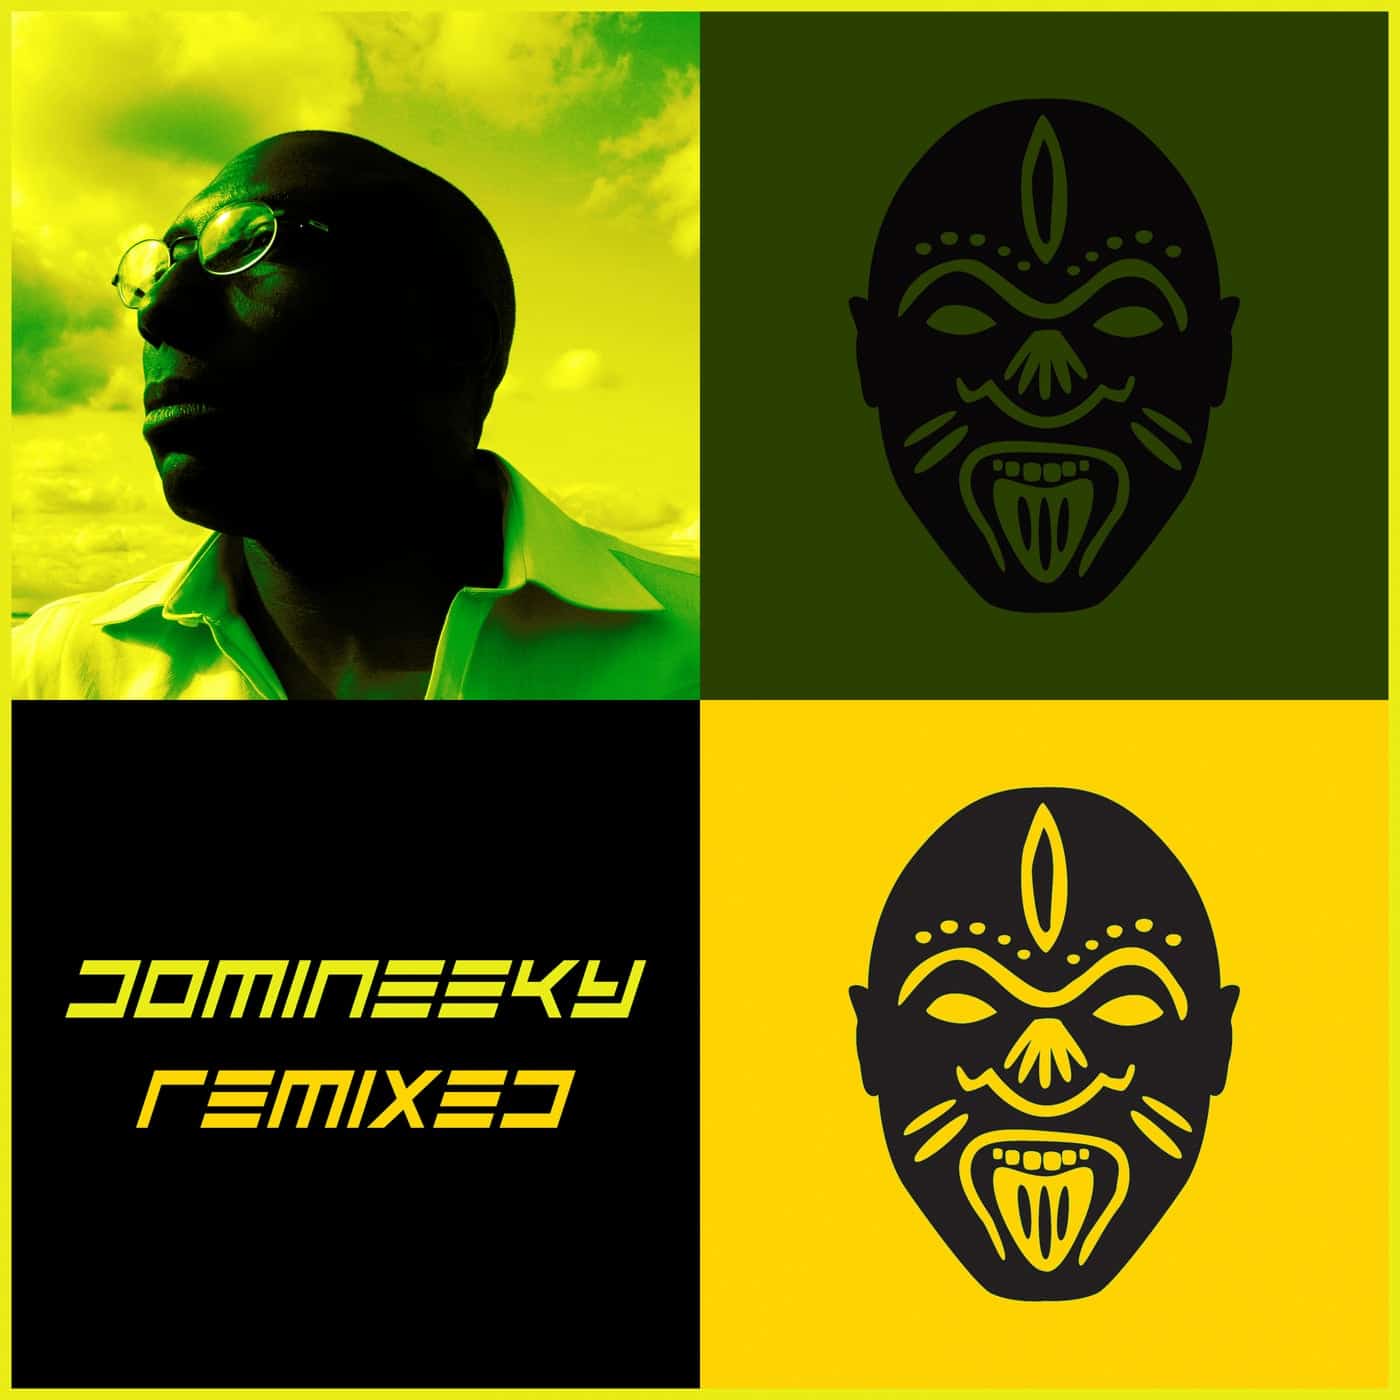 image cover: Domineeky, Tru Roots Project, Planet Galaxy - Domineeky Remixed / GVMLP005B